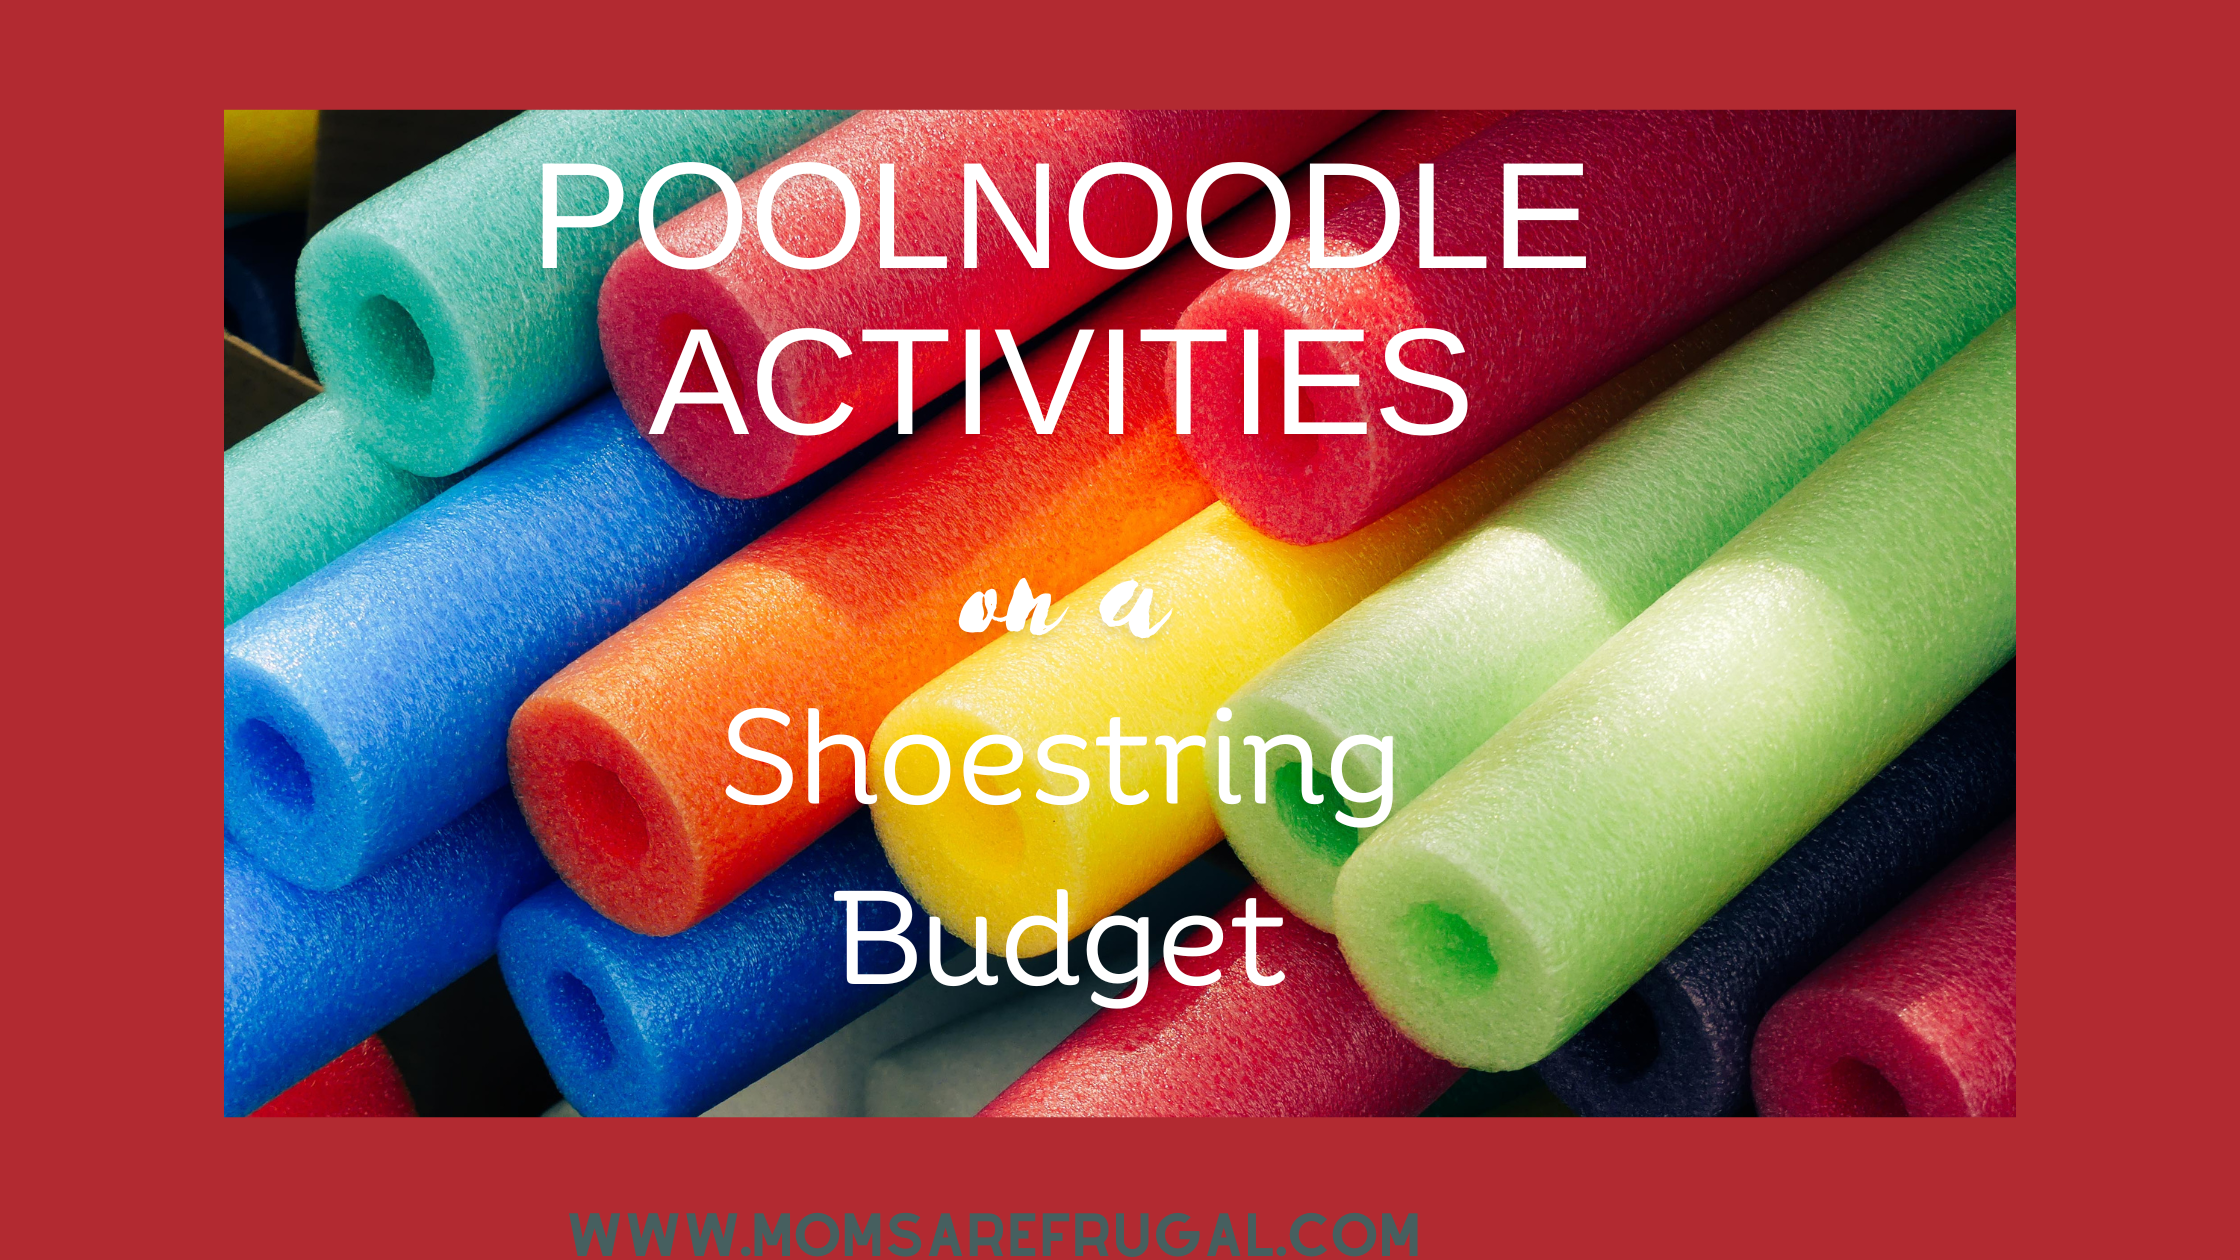 Pool Noodle Activities on a Shoestring Budget